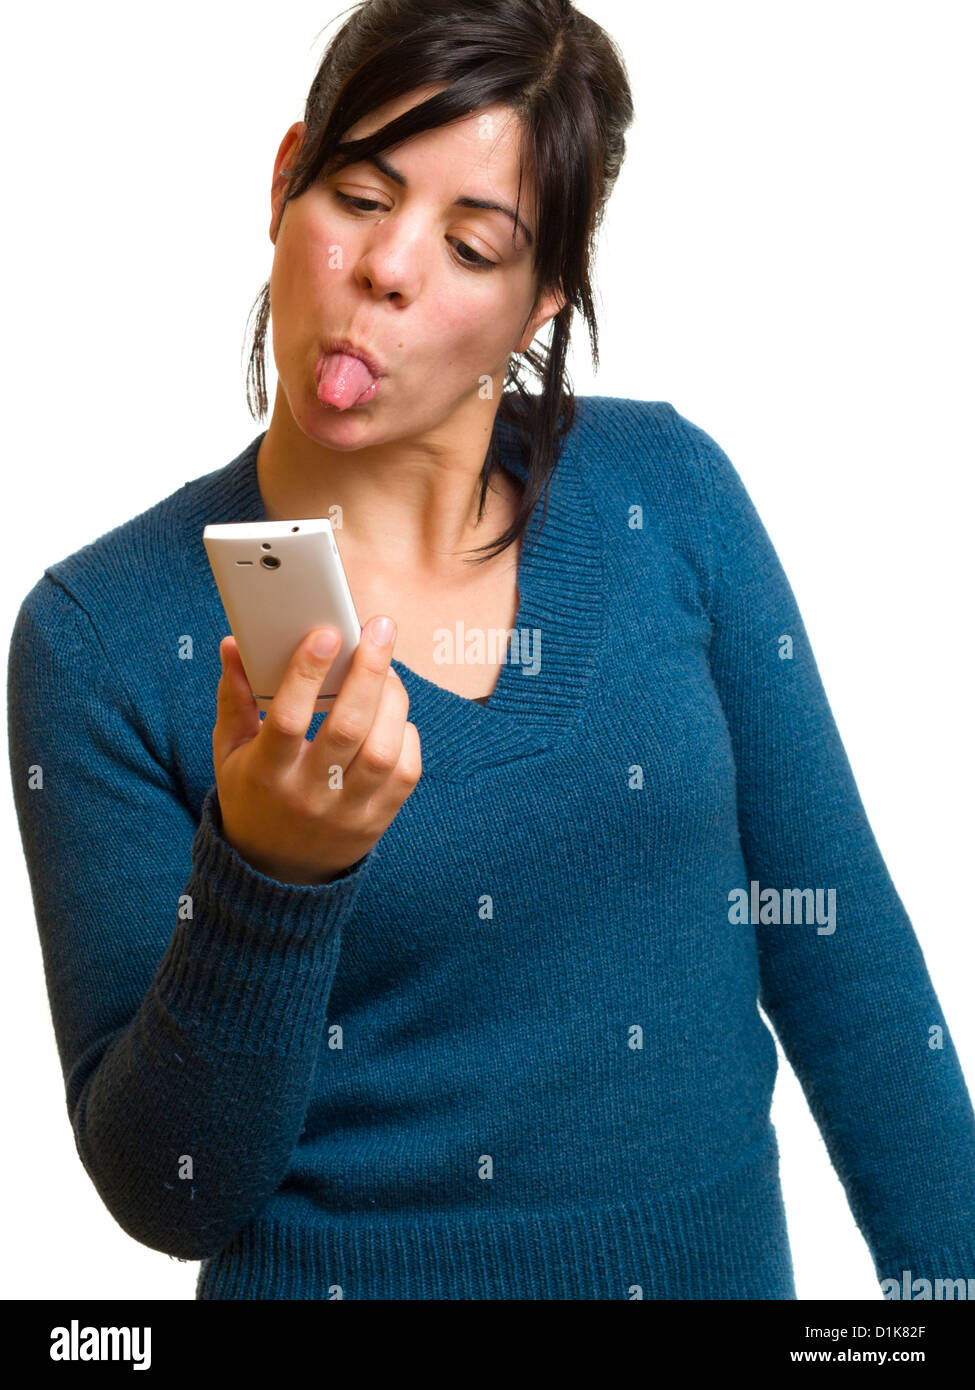 Angry young woman sticking her tongue out at mobile phone Stock Photo